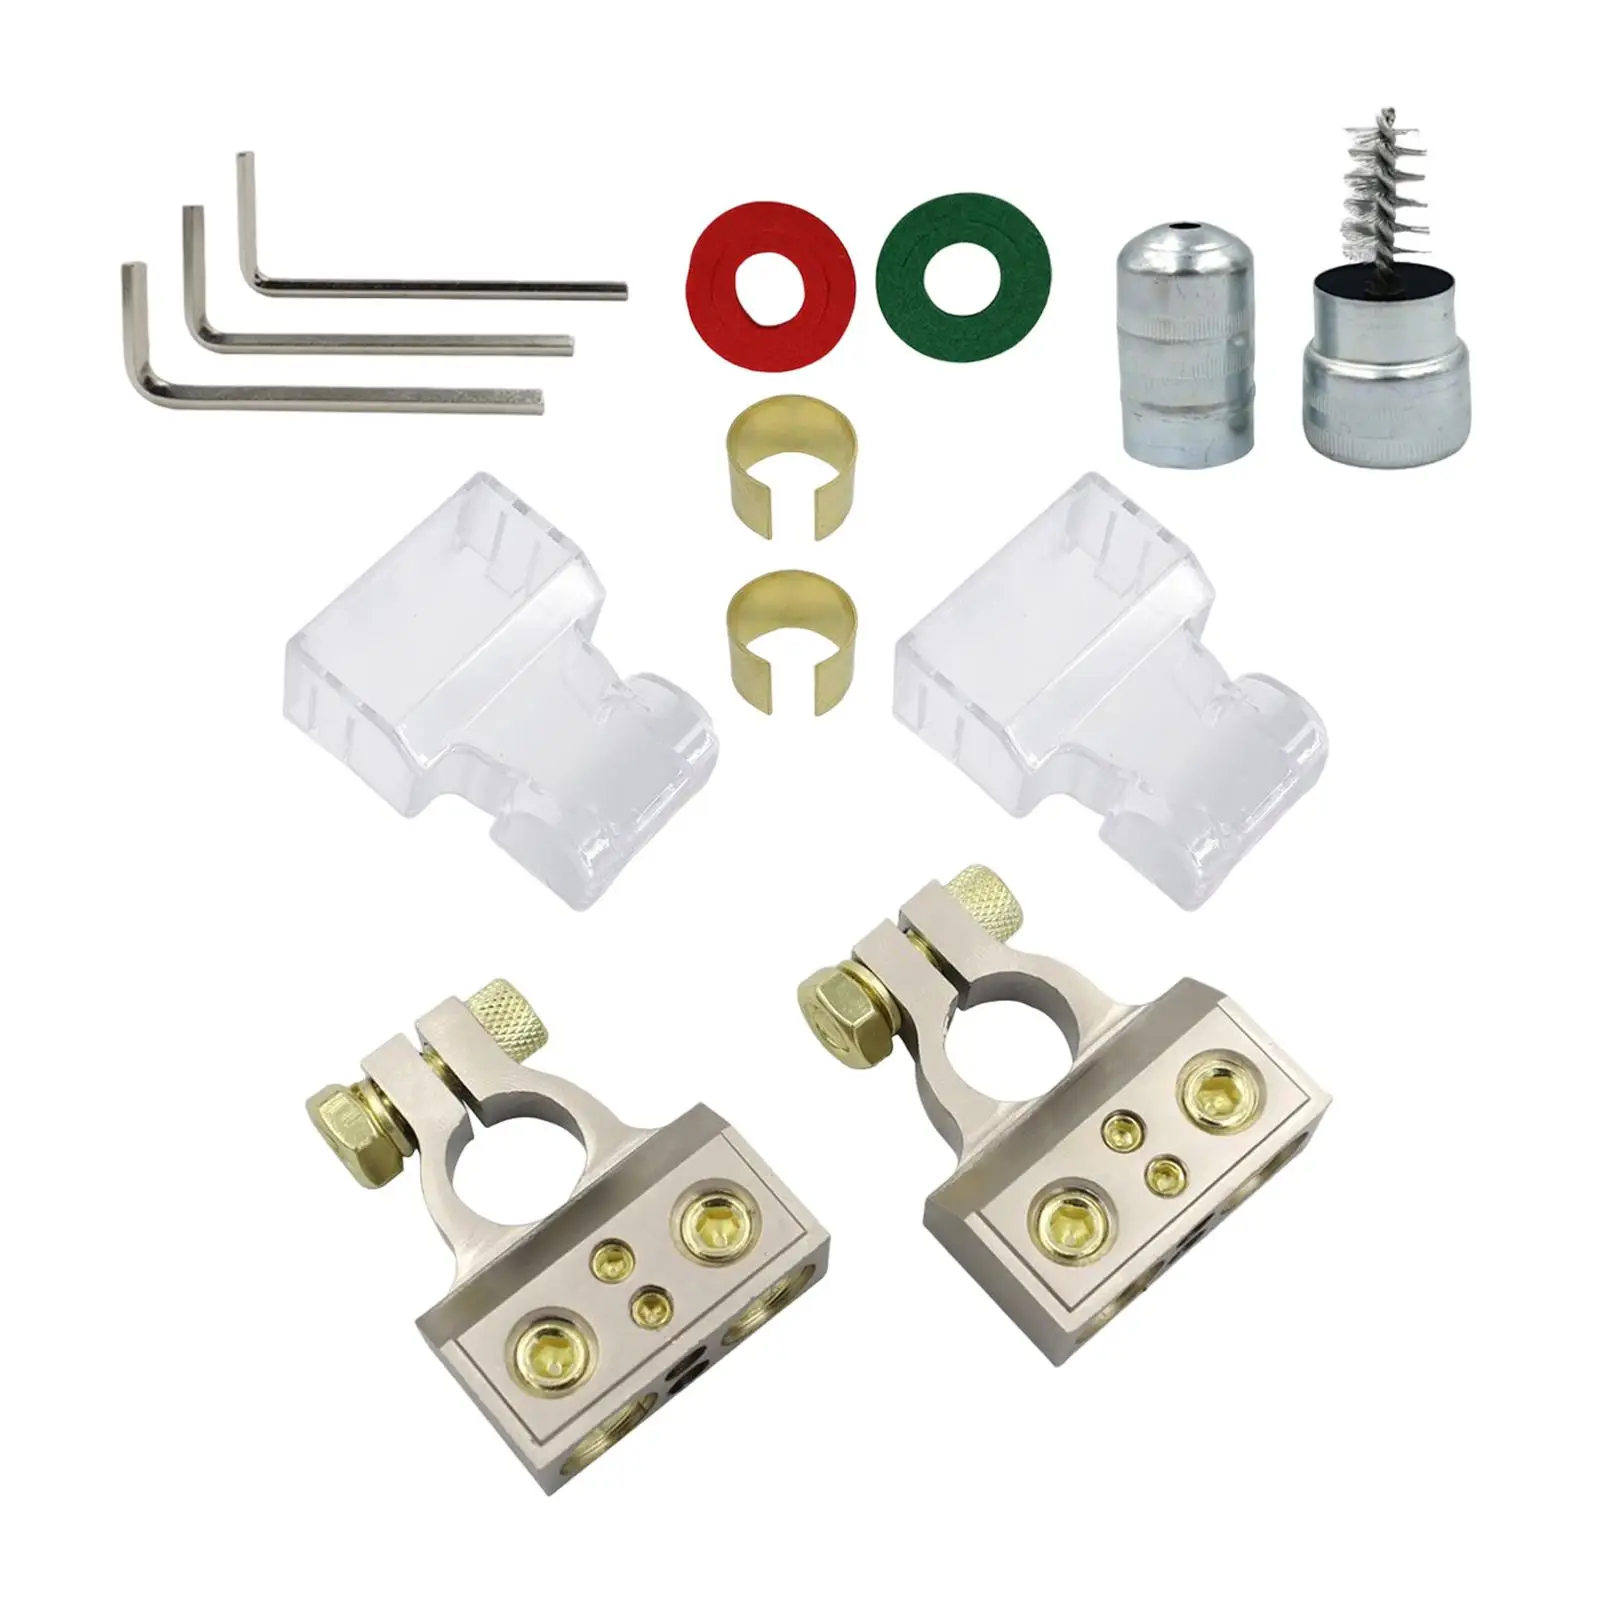 Battery Terminal Connector Kits with Cleaning Brush with Washers for Bus Widely Use Direct Replaces Easy to Install